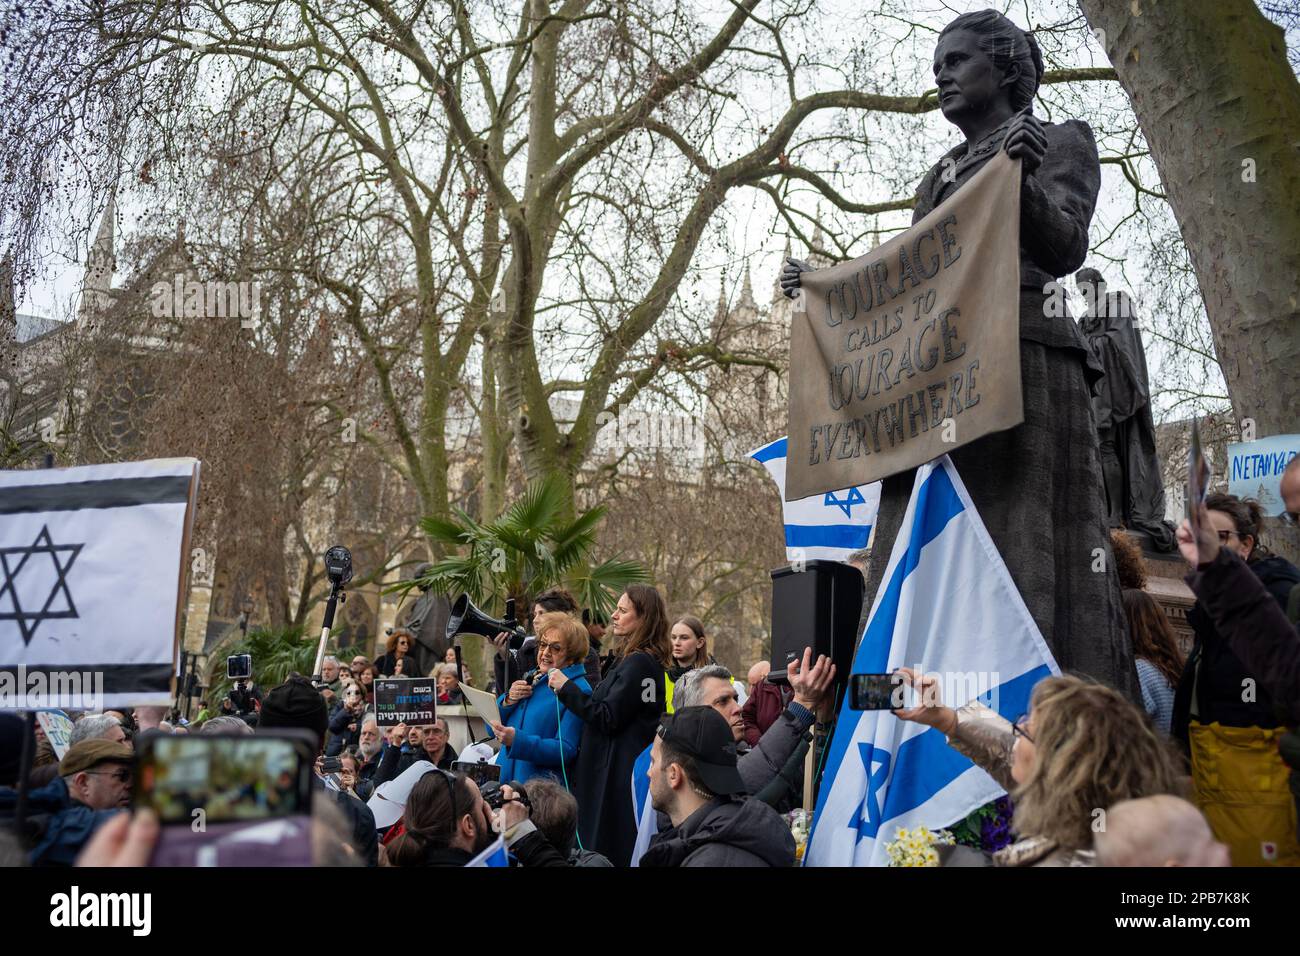 London/UK 12 MAR 2023 Hundreds turned out to demonstrate in London against the planned judicial shakeup in Israel. Over 300 hundred people gathered on Parliament Square chanting ‘Democracia’ in between supporting speakers at the rally. Aubrey Fagon/Alamy Live News Stock Photo